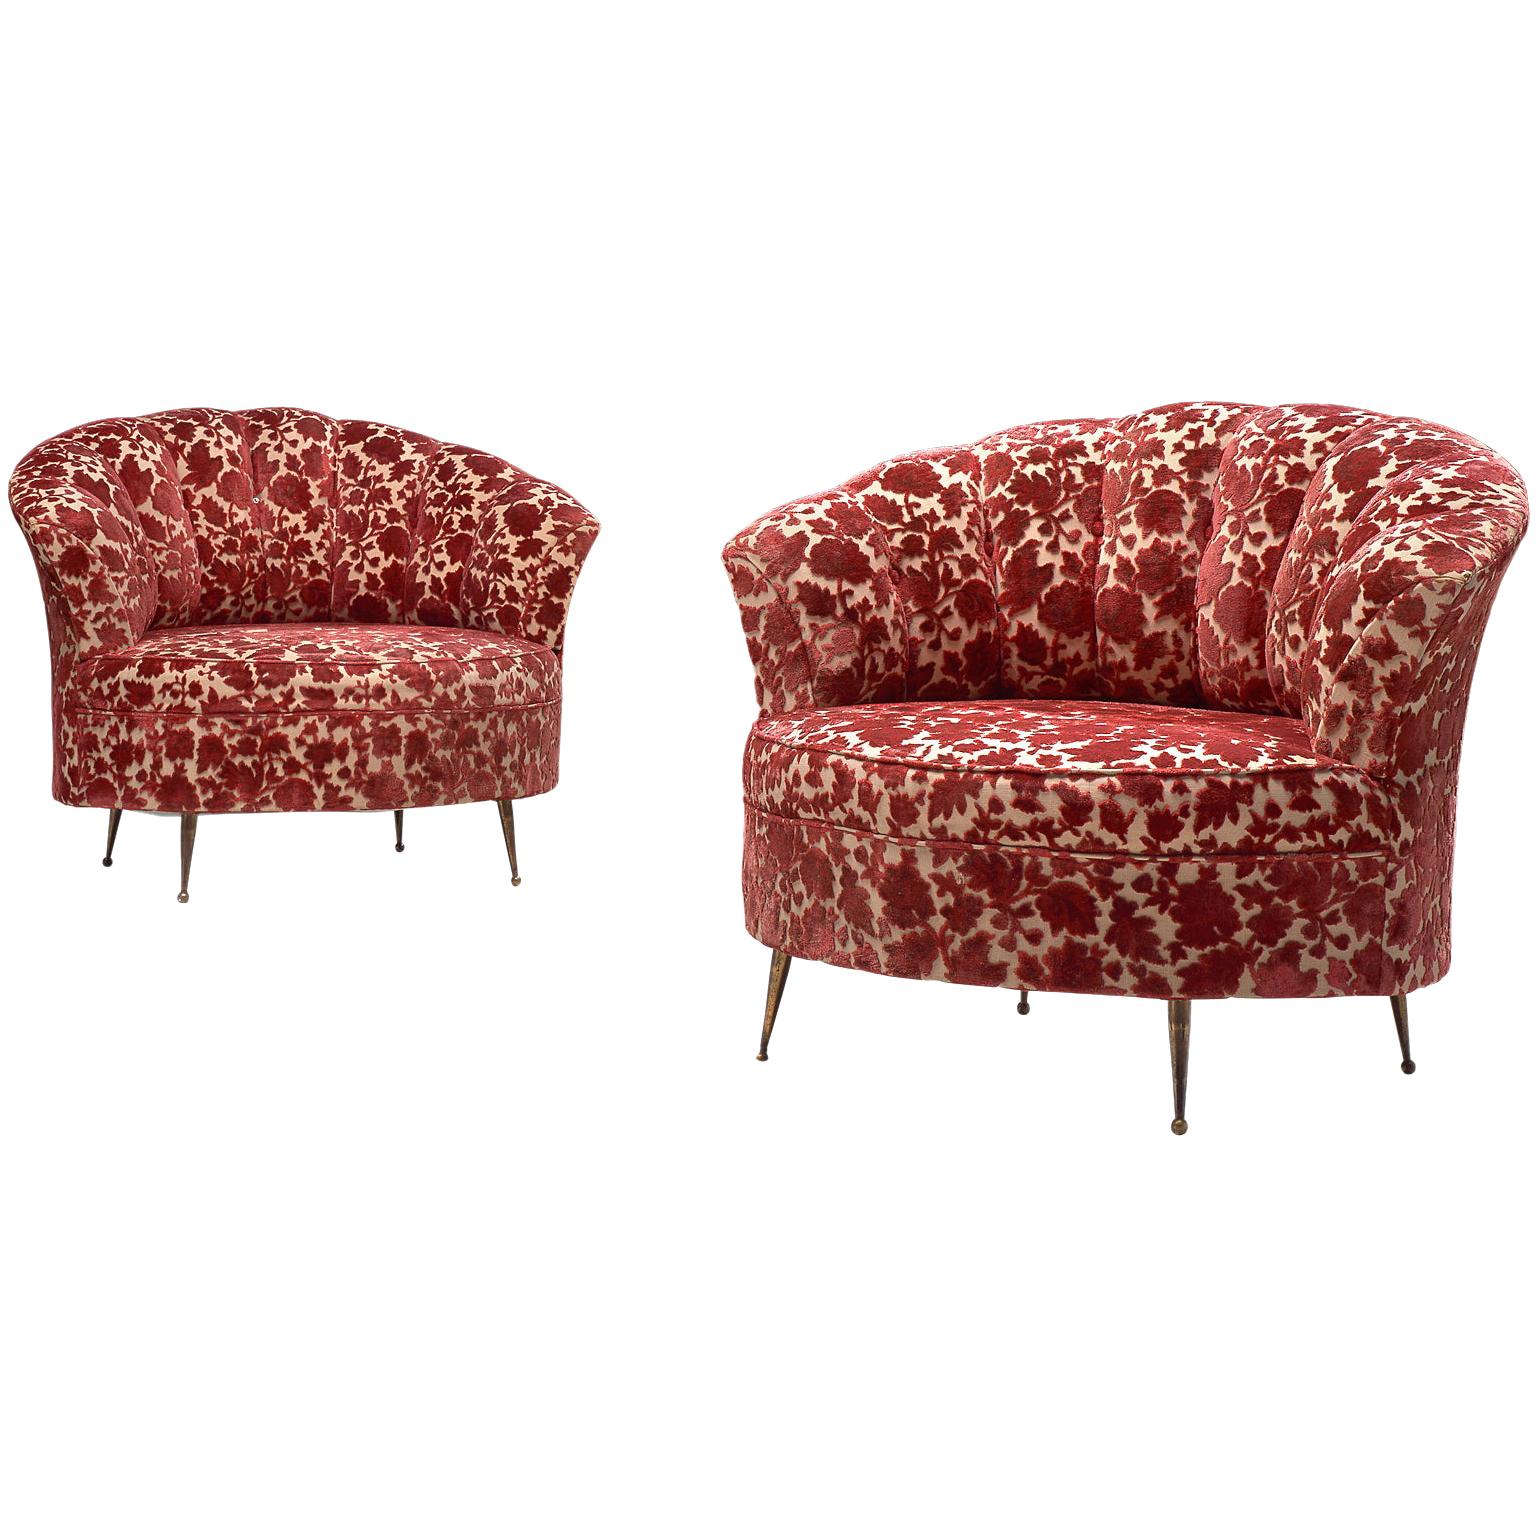 Pair of Elegant Italian Lounge Chairs in Red Floral Upholstery